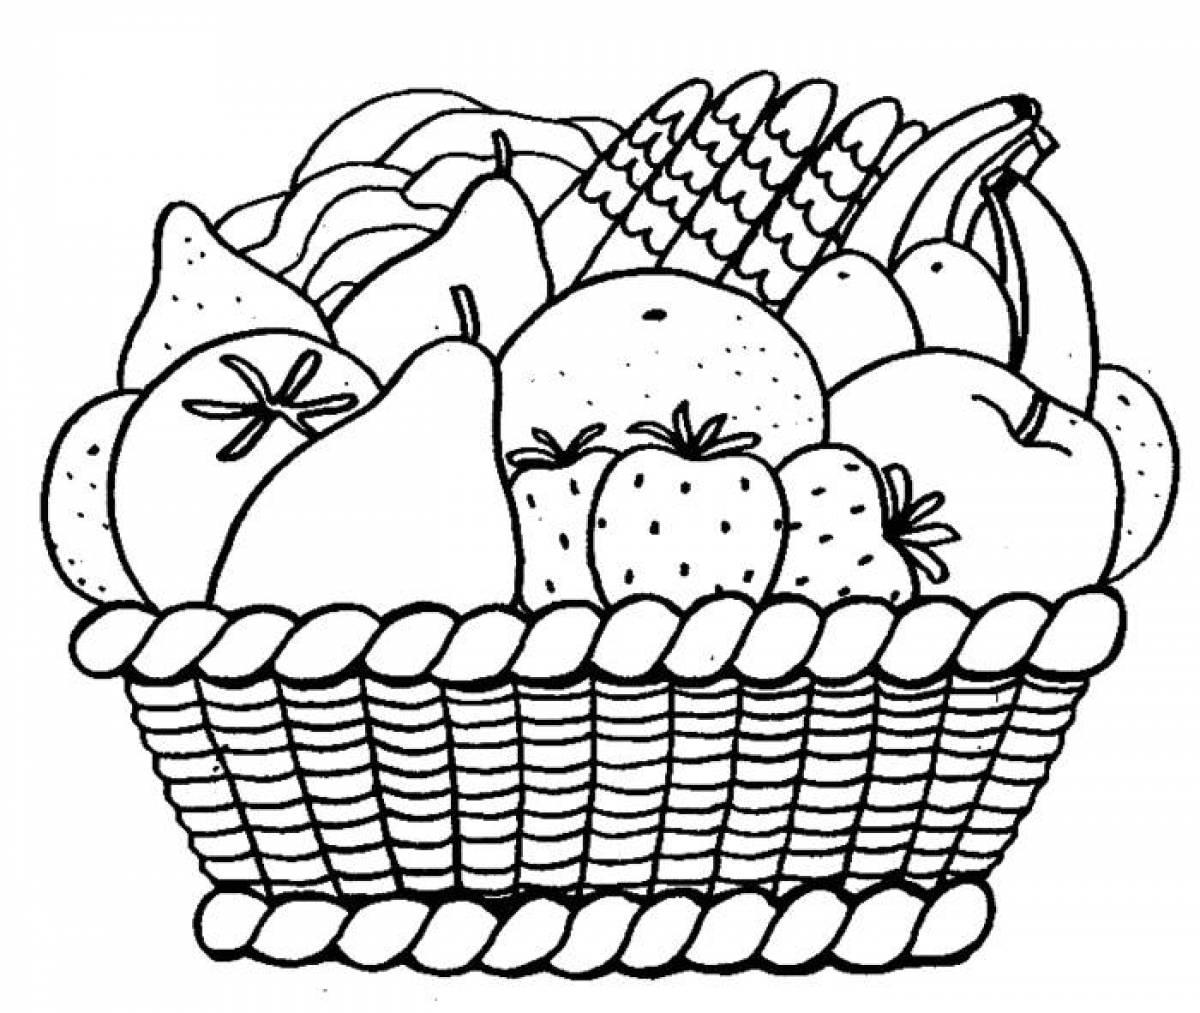 Fruits in a basket